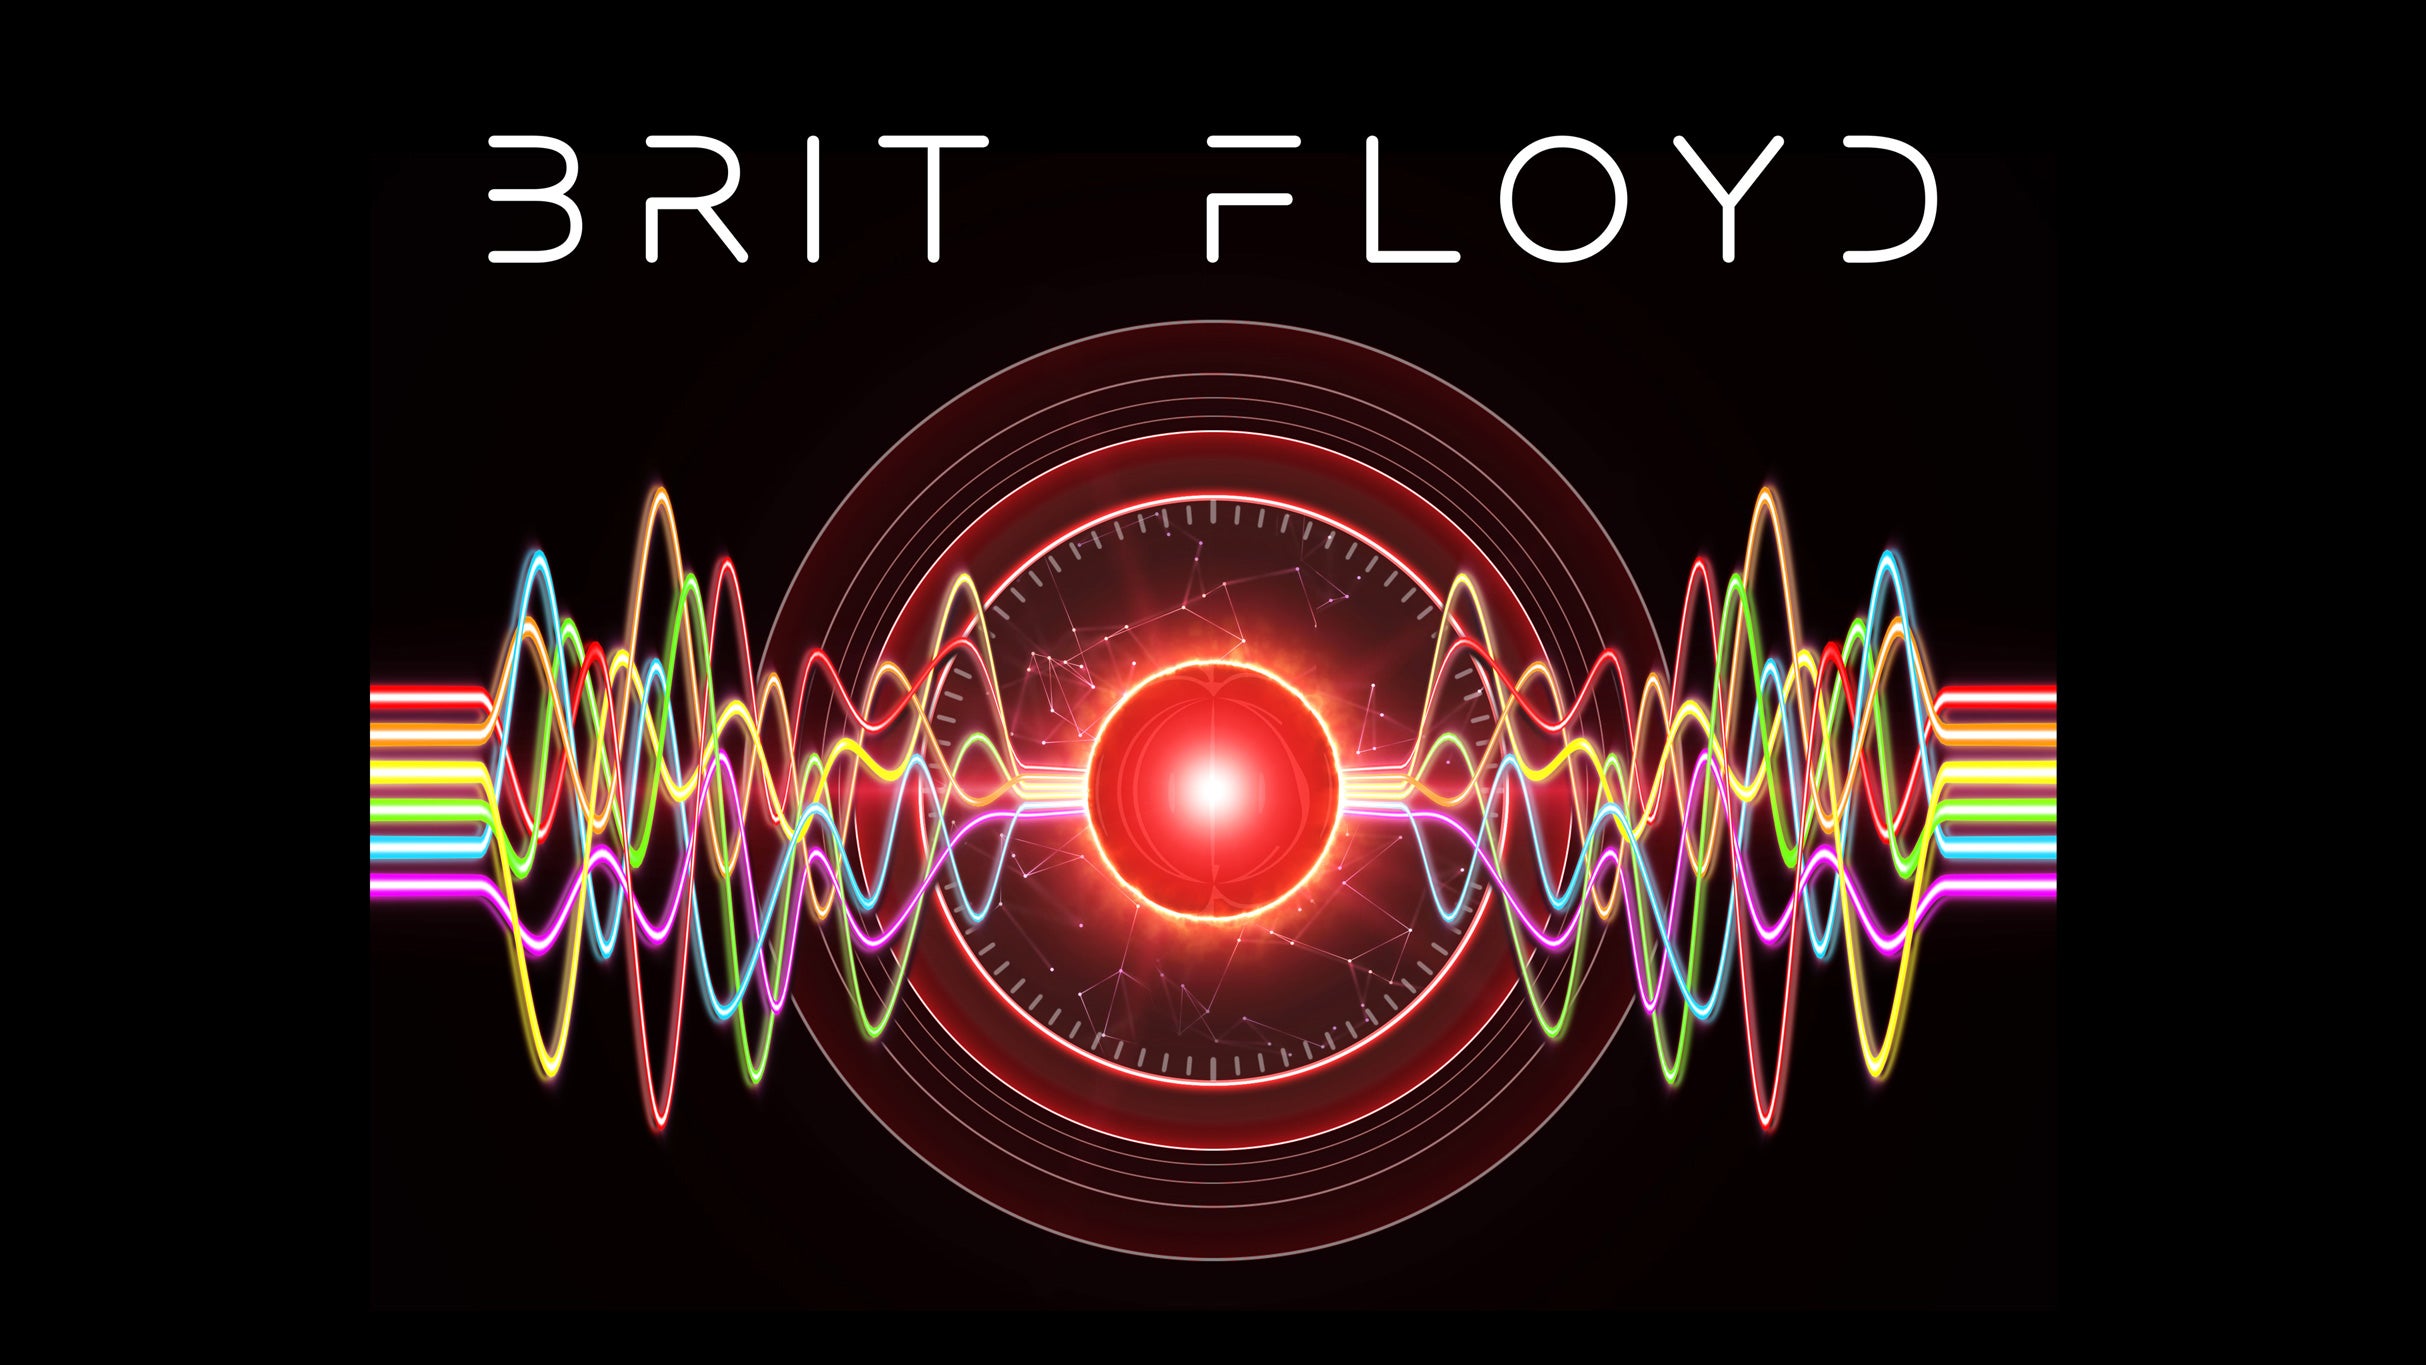 BRIT FLOYD: P-U-L-S-E Celebrating 30 years of The Division Bell pre-sale password for event tickets in North Little Rock, AR (Simmons Bank Arena)